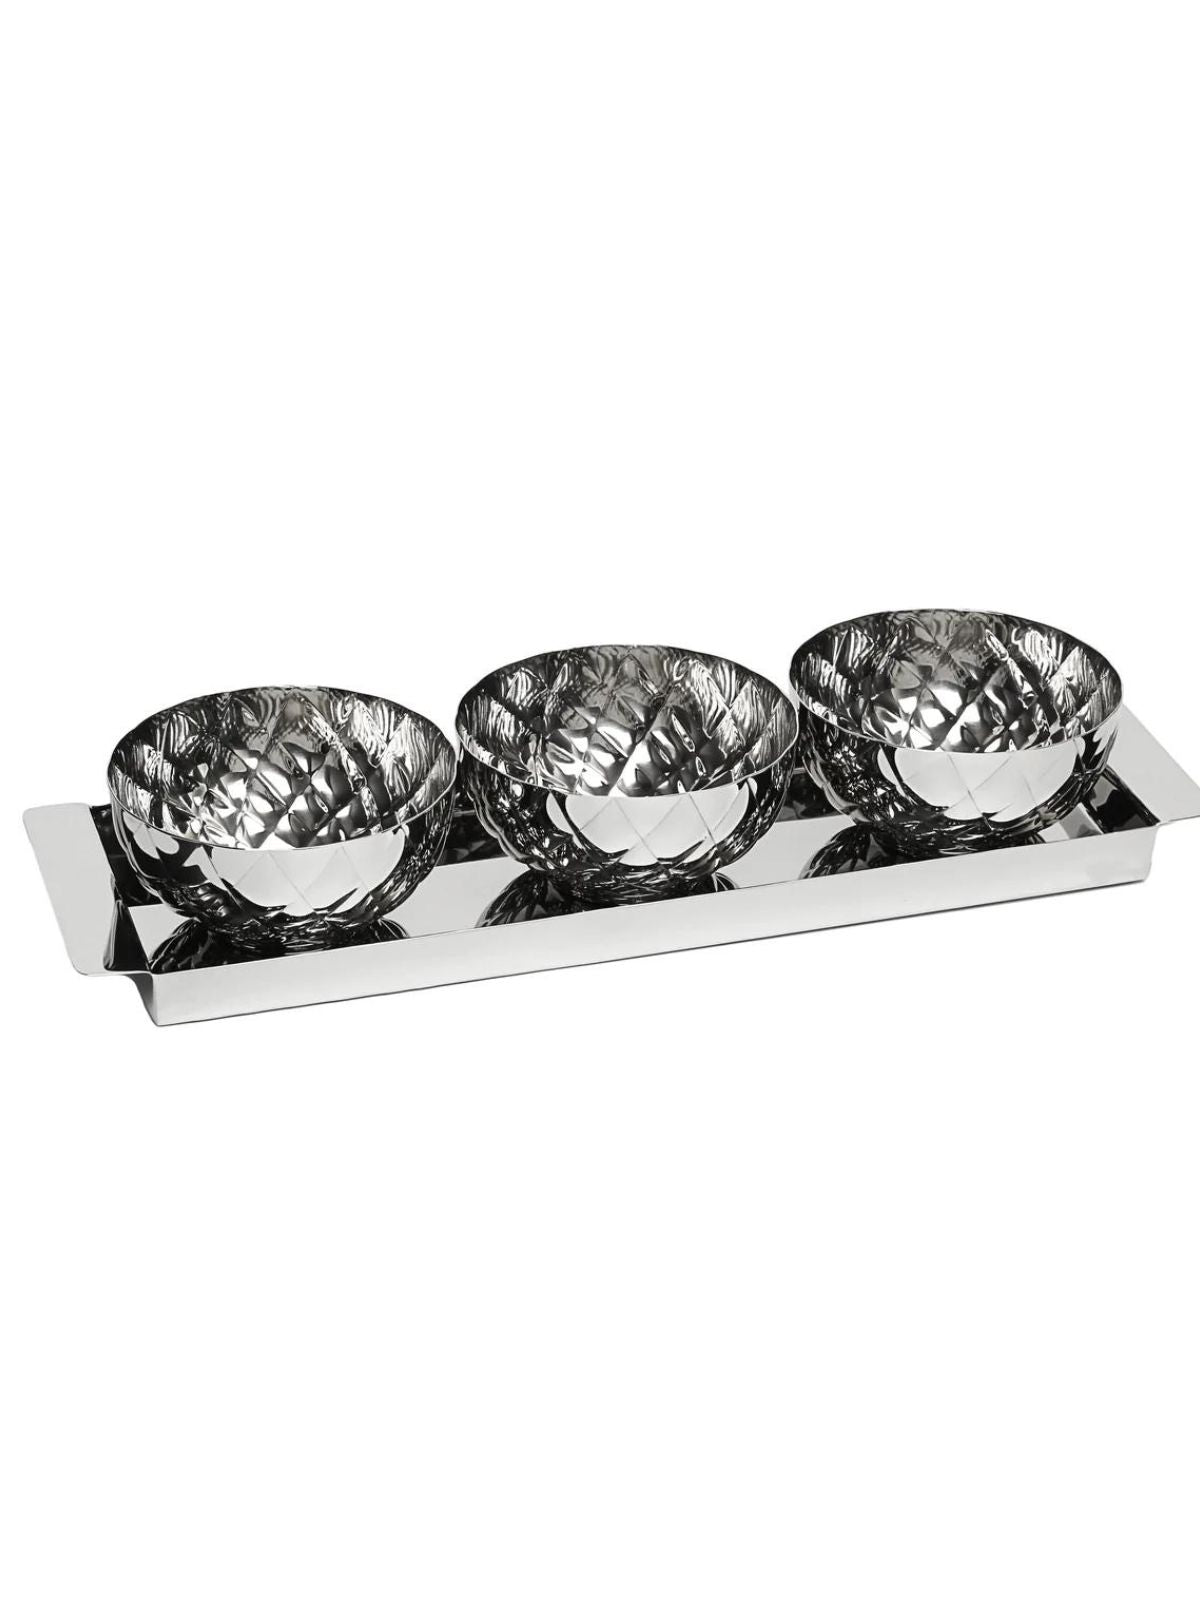 The Piña Dulce Stainless Steel Bowls with Tray will surely enhance every table setting. Its an attractive display of nuts, candies, or just any confectionery. Its durable enough for everyday use yet elegant for some special occasion.